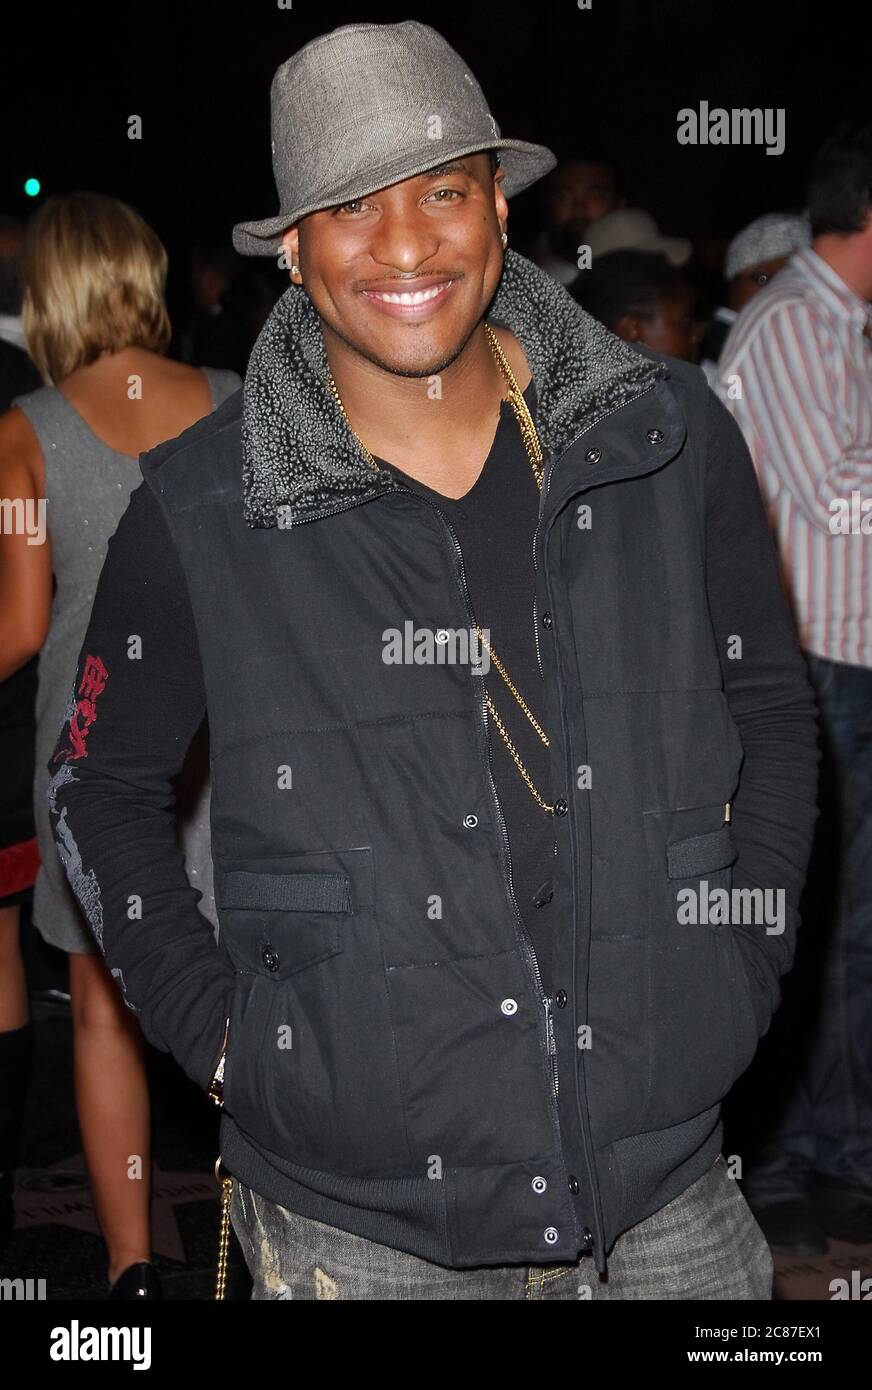 Sterlen Roberts at the Premiere of 'Somebody Help Me' held at the Grauman's Chinese Theater in Hollywood, CA. The event took place on Thursday, October25, 2007. Photo by: SBM / PictureLux- File Reference # 34006-9660SBMPLX Stock Photo